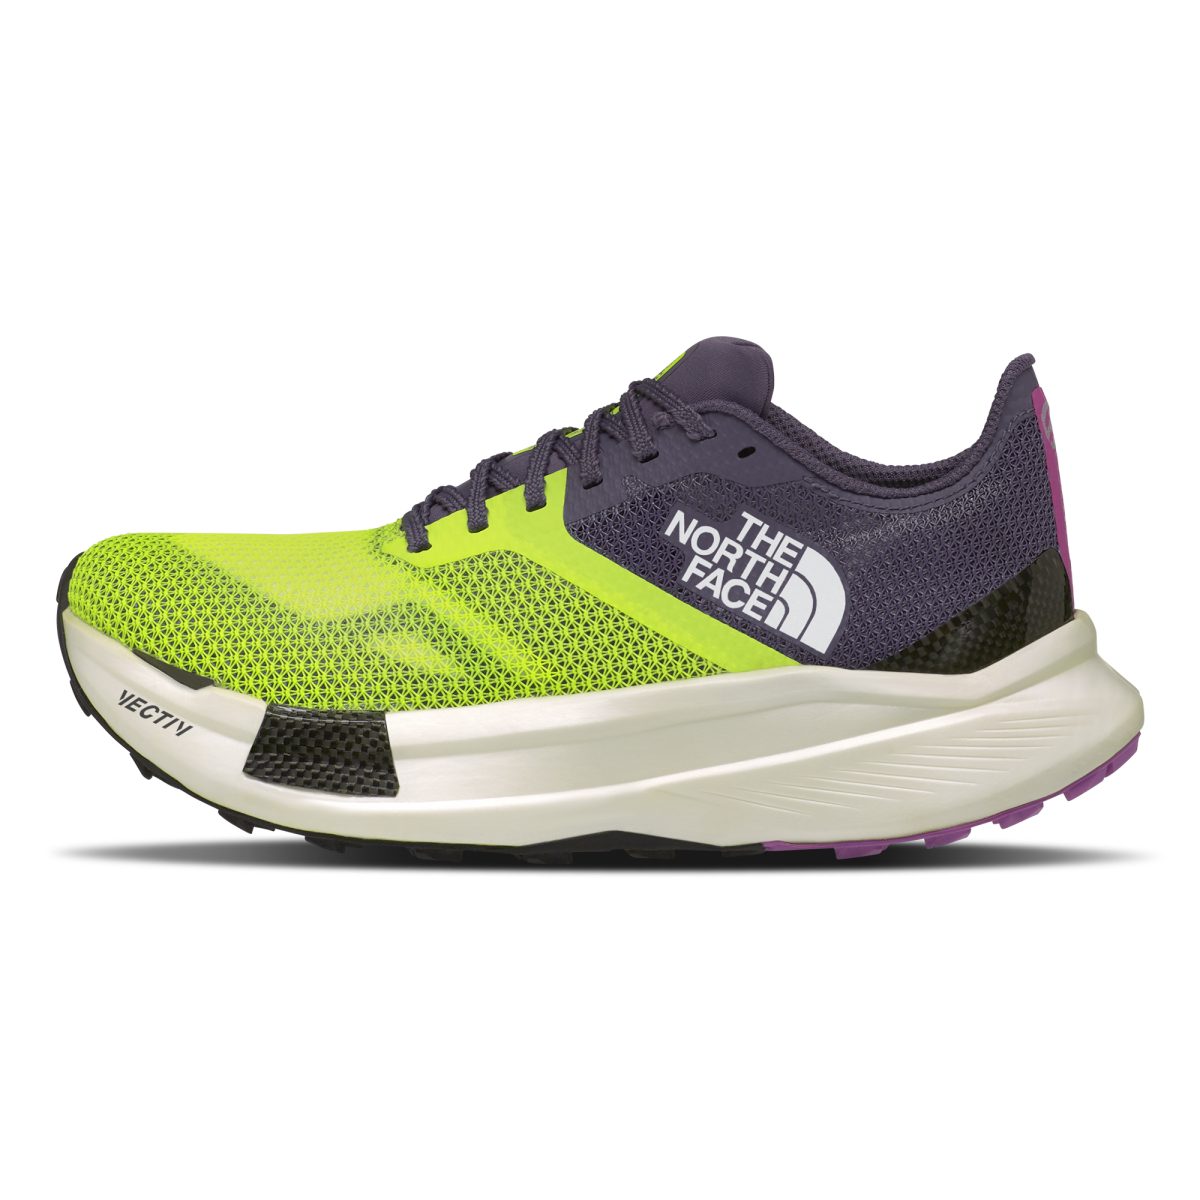 The North Face Women's Summit Series VECTIV Pro Trail Running Shoes